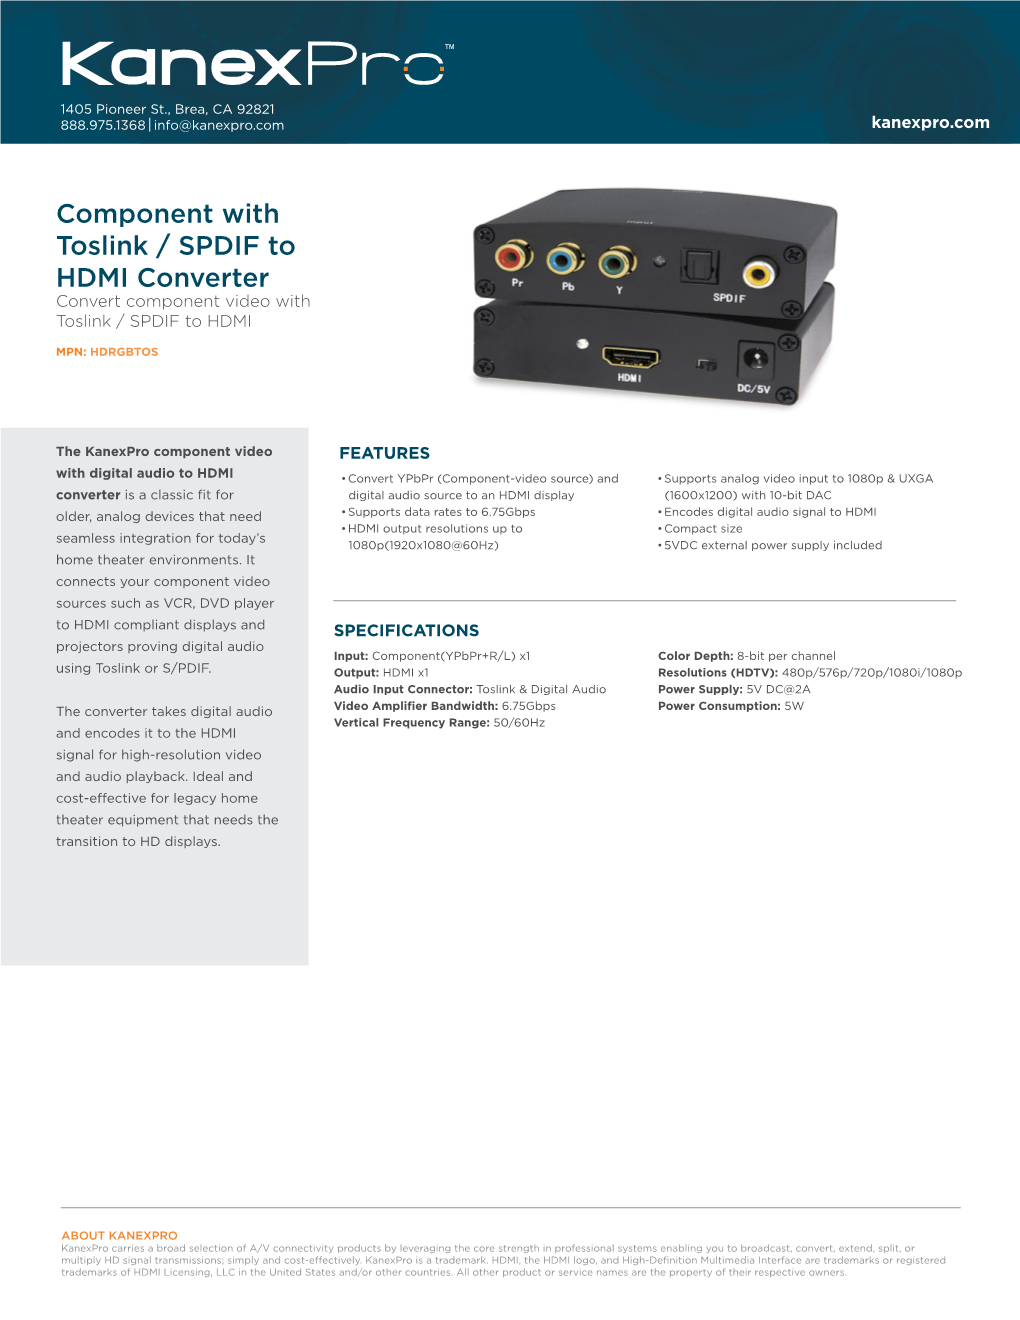 Component with Toslink / SPDIF to HDMI Converter Convert Component Video with Toslink / SPDIF to HDMI